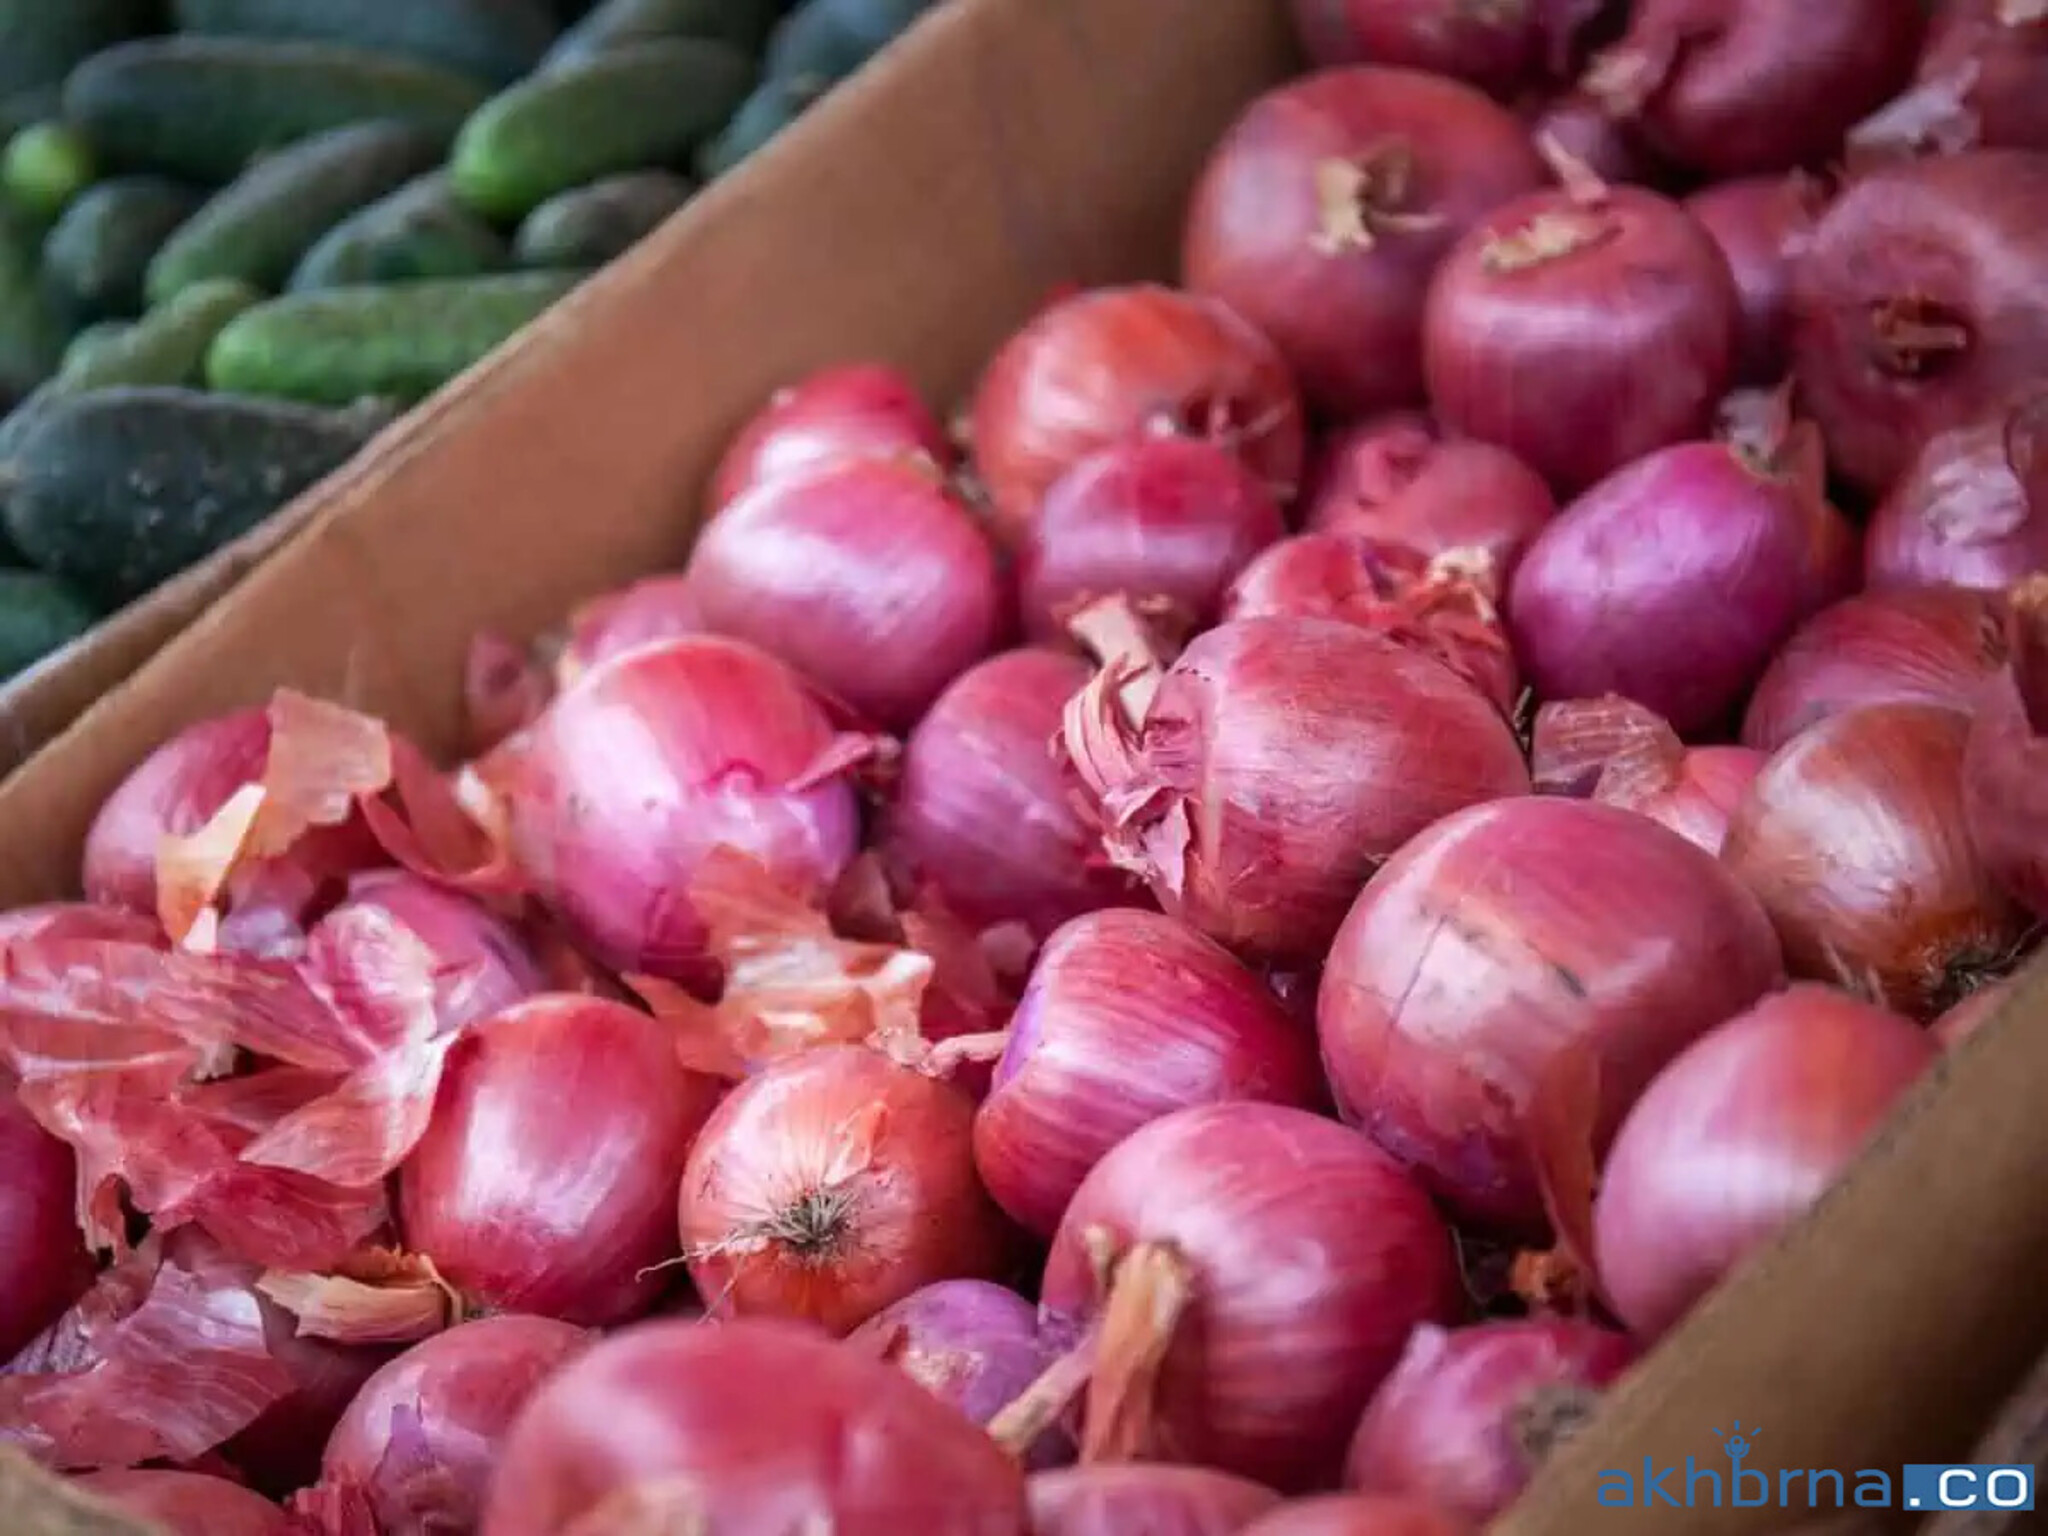 India Allows Extra 10,000 Tons of Onion Export to UAE Amidst Crisis